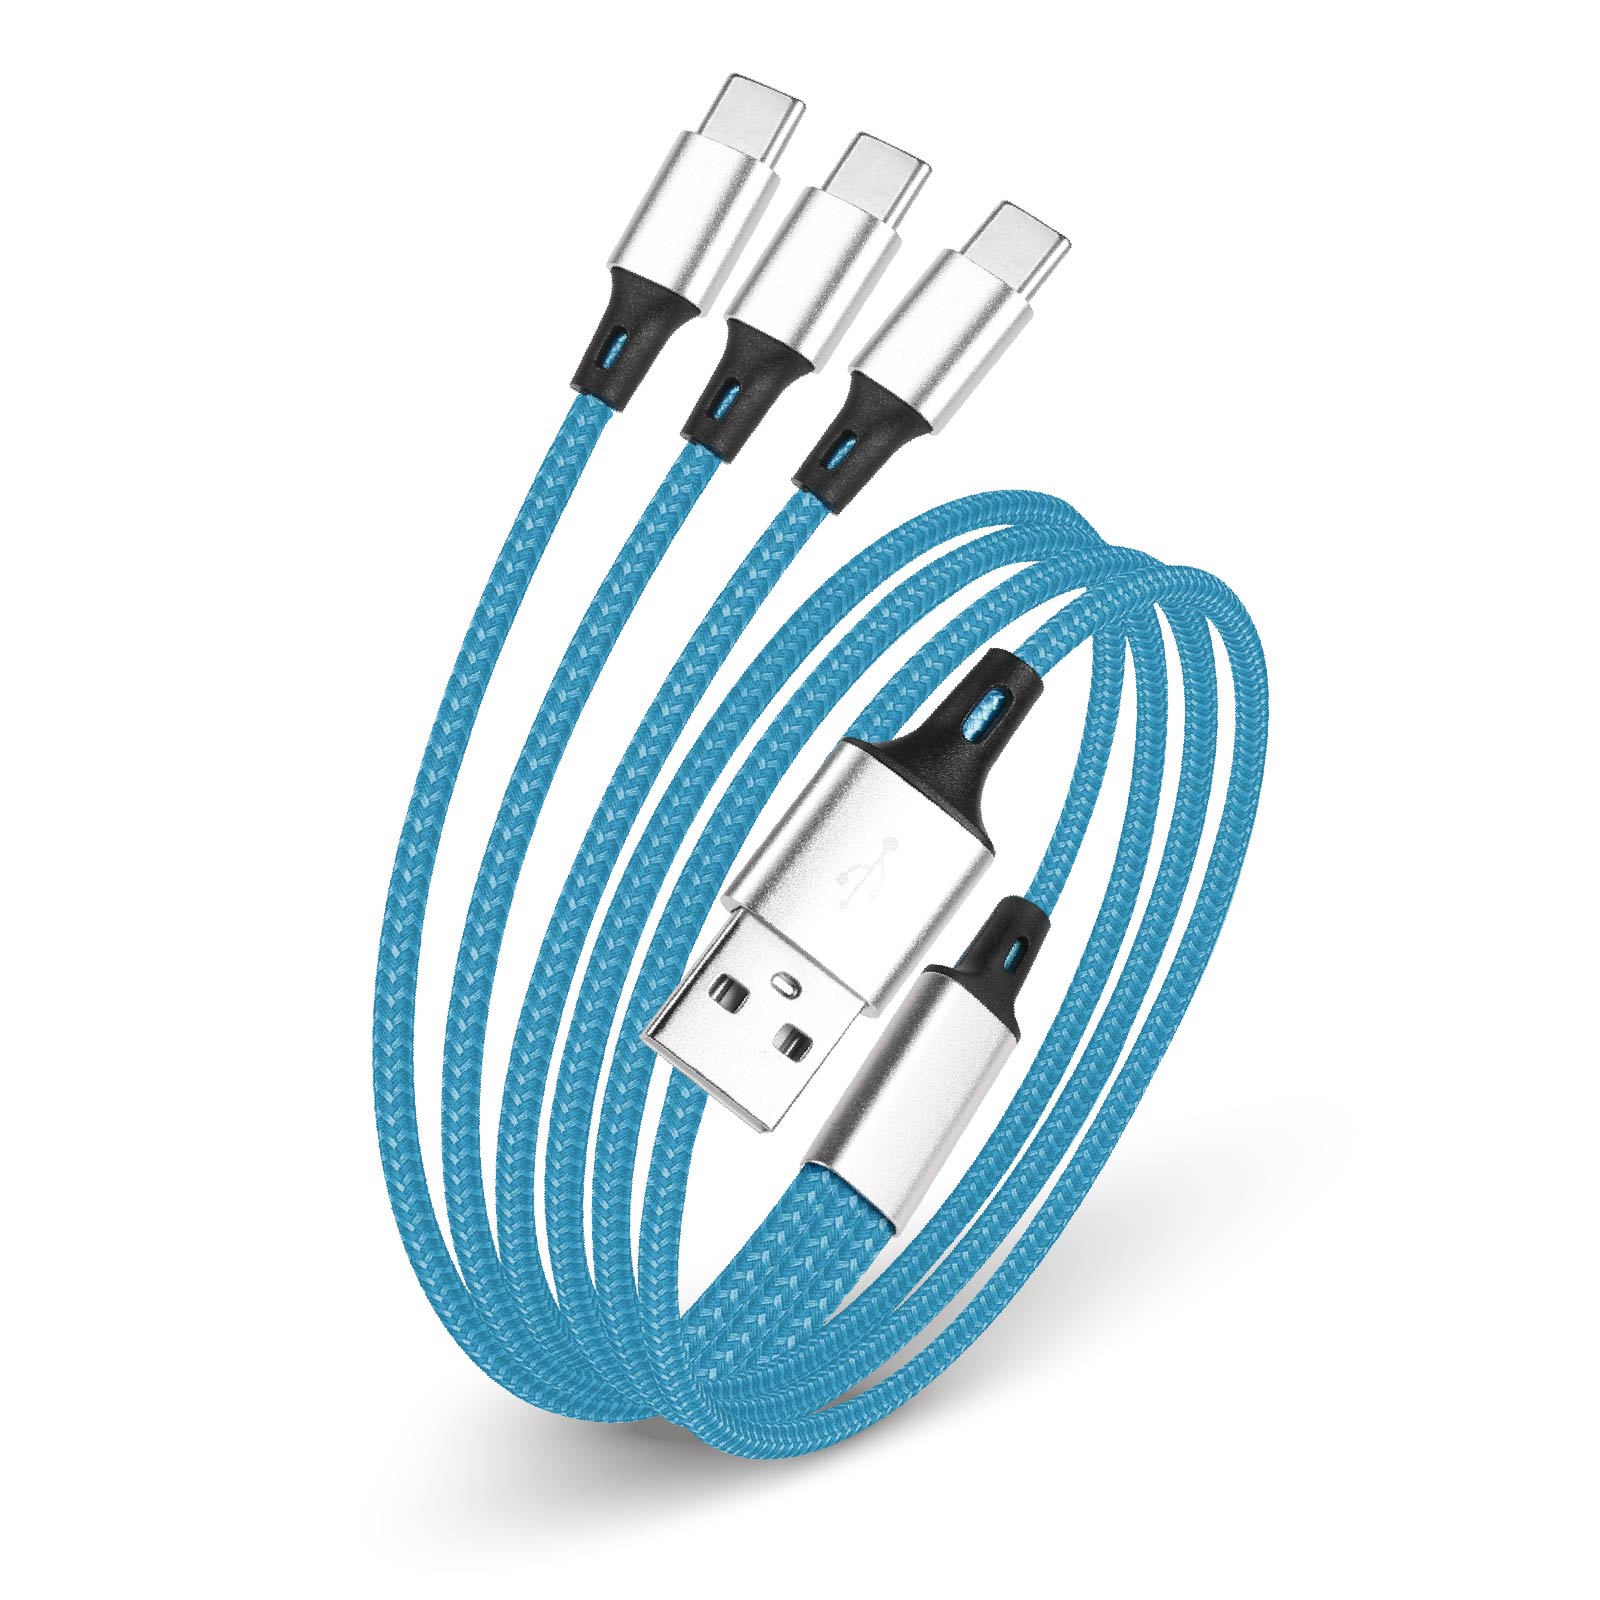 3 In 1 Multi Charging & Data Cable